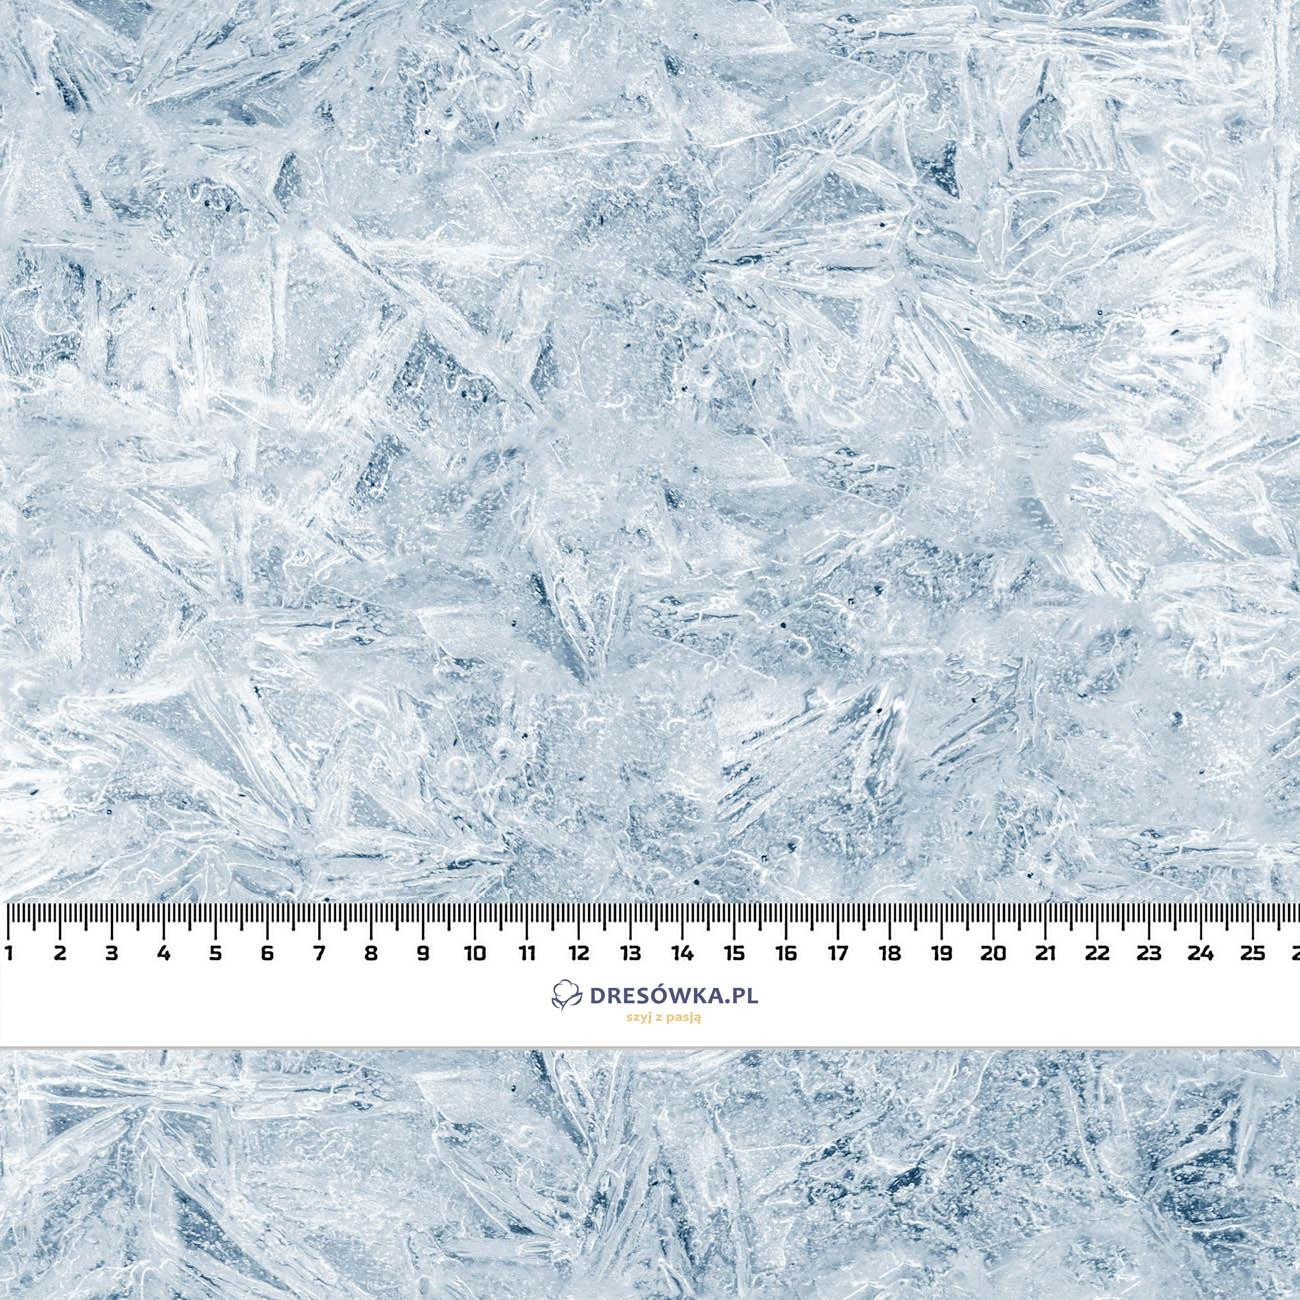 FROST pat. 2 / light blue (PAINTED ON GLASS) - Waterproof woven fabric